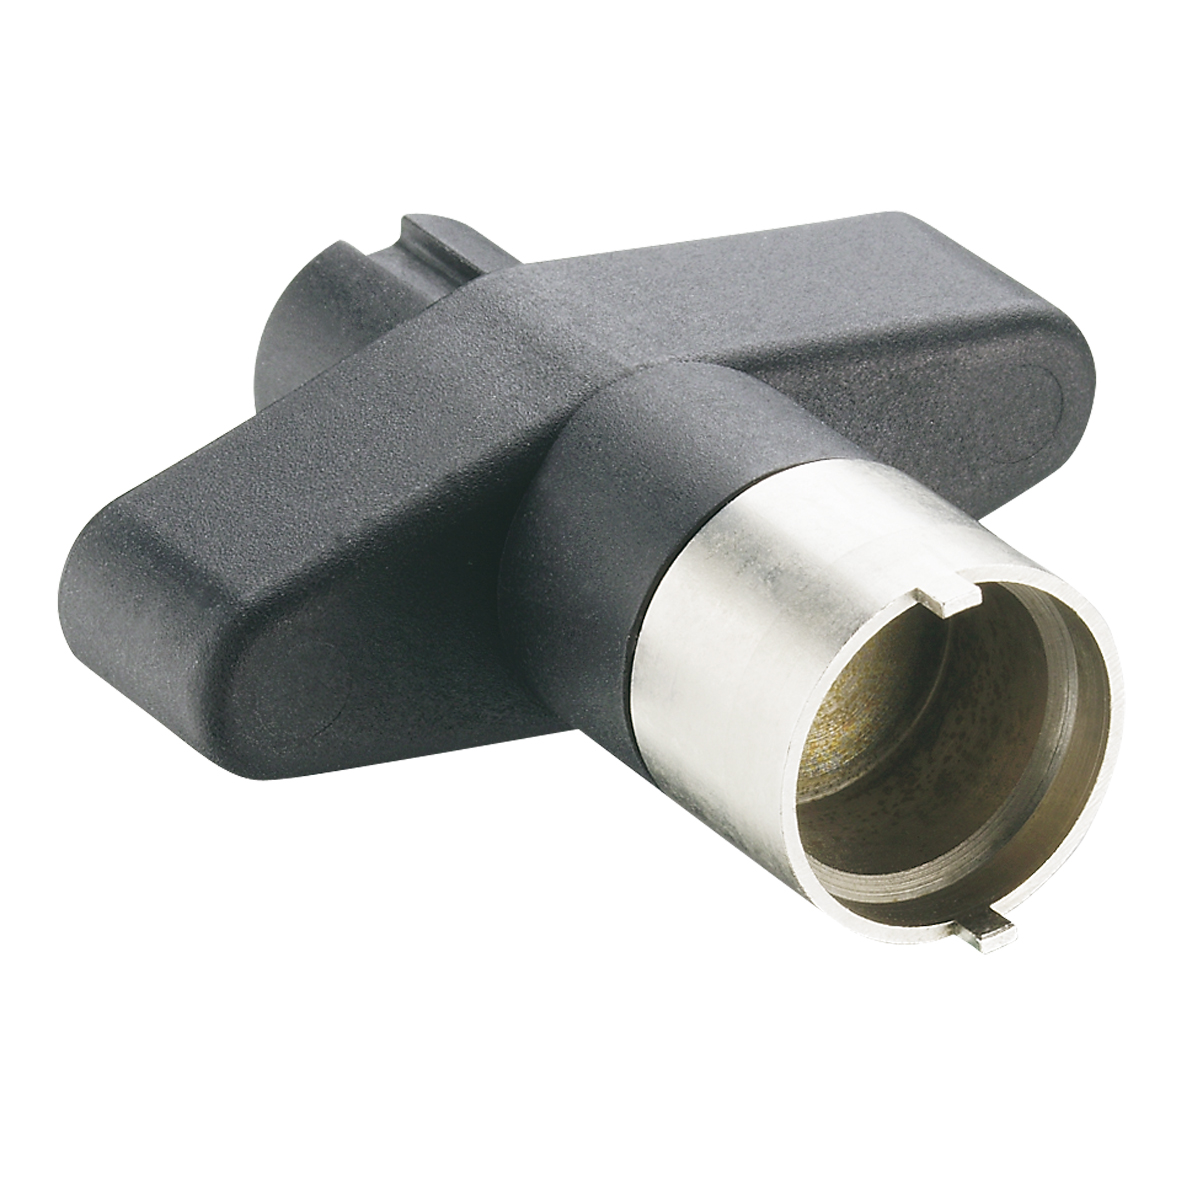 Lumberg: 380 (Series 03 | Circular connectors with threaded joint M16 acc. to IEC 61076-2-106, IP40/IP68)